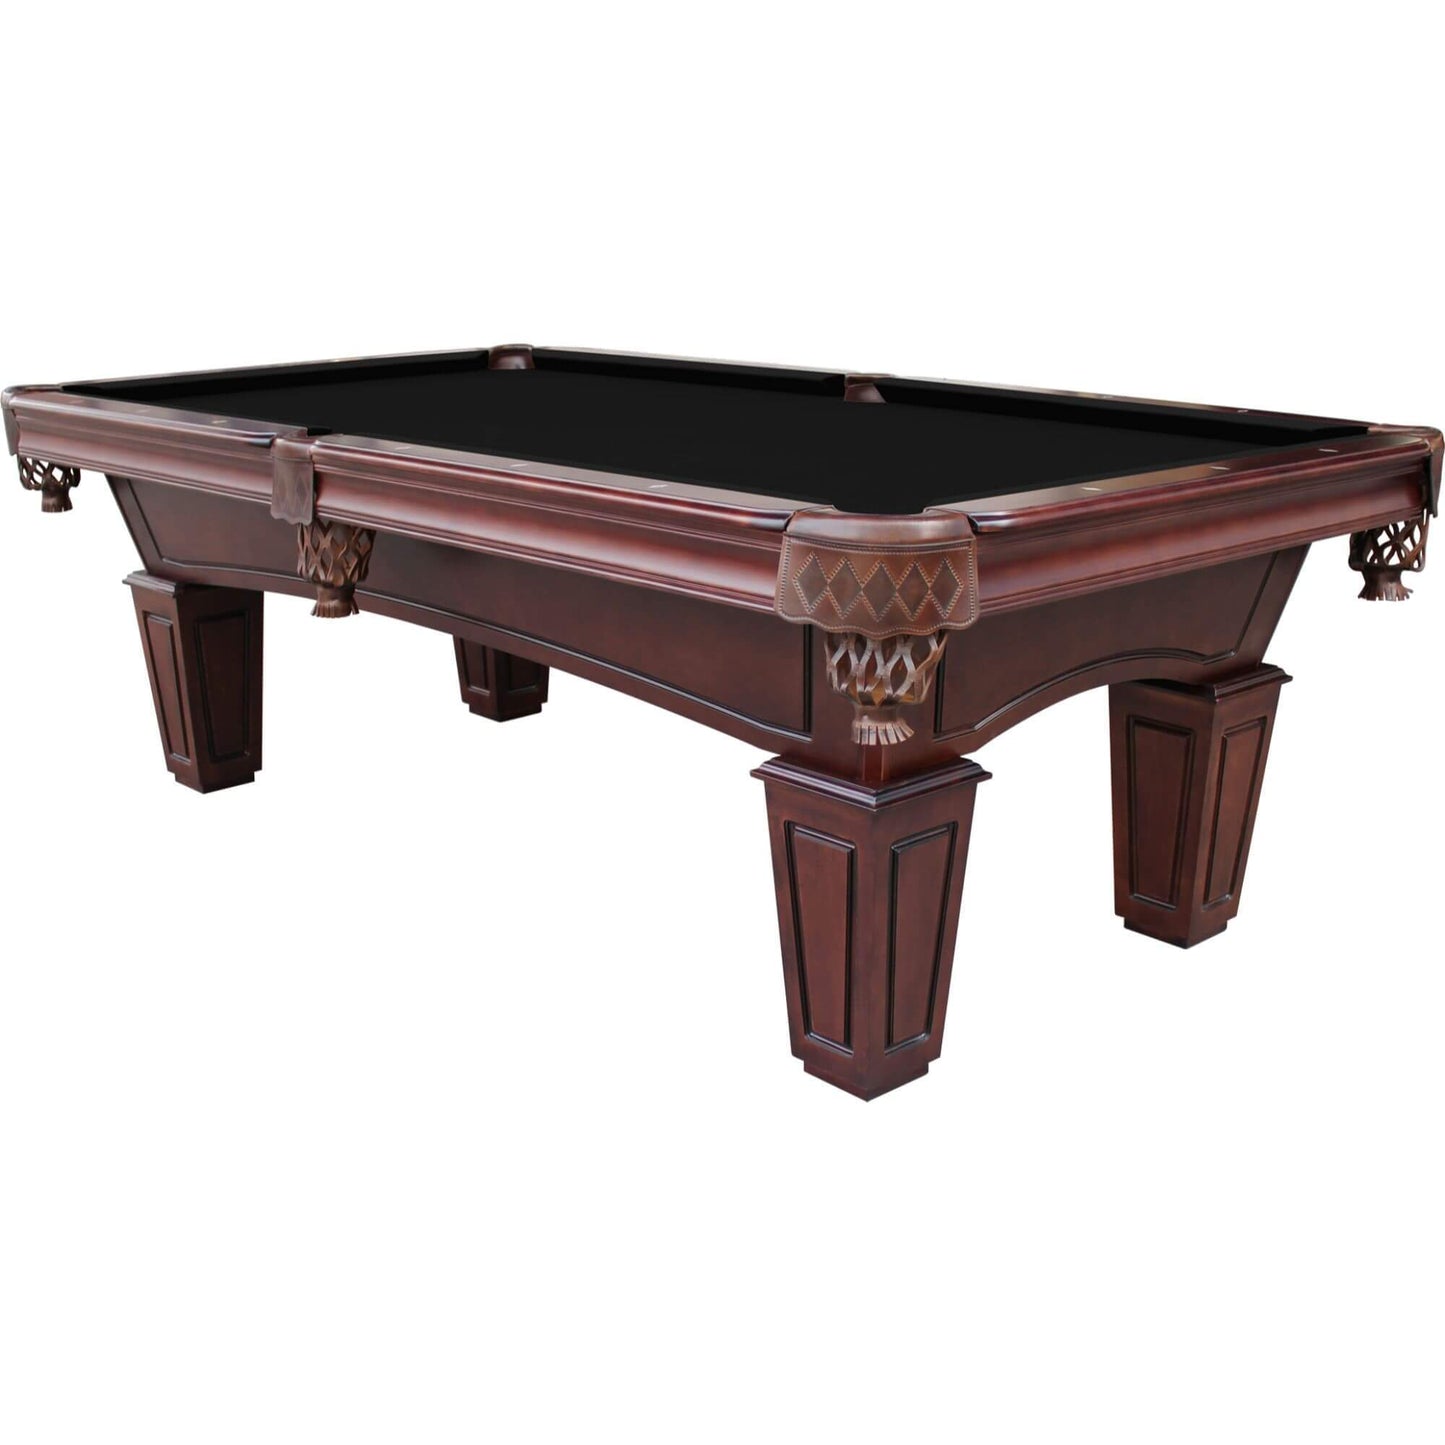 Playcraft St. Lawrence 8' Slate Pool Table with Leather Drop Pockets - Gaming Blaze